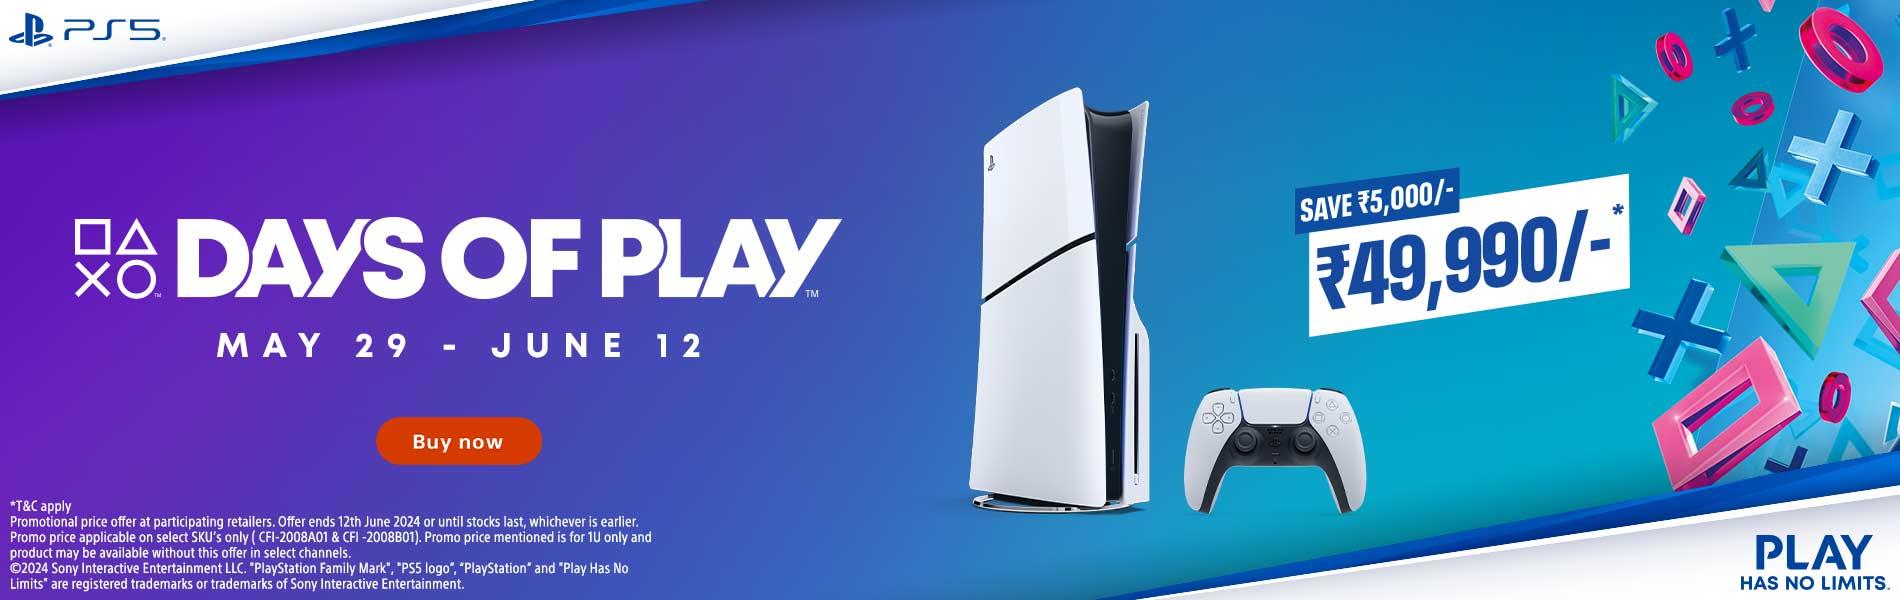 PS5 Console avaialble at Poorvika web banner